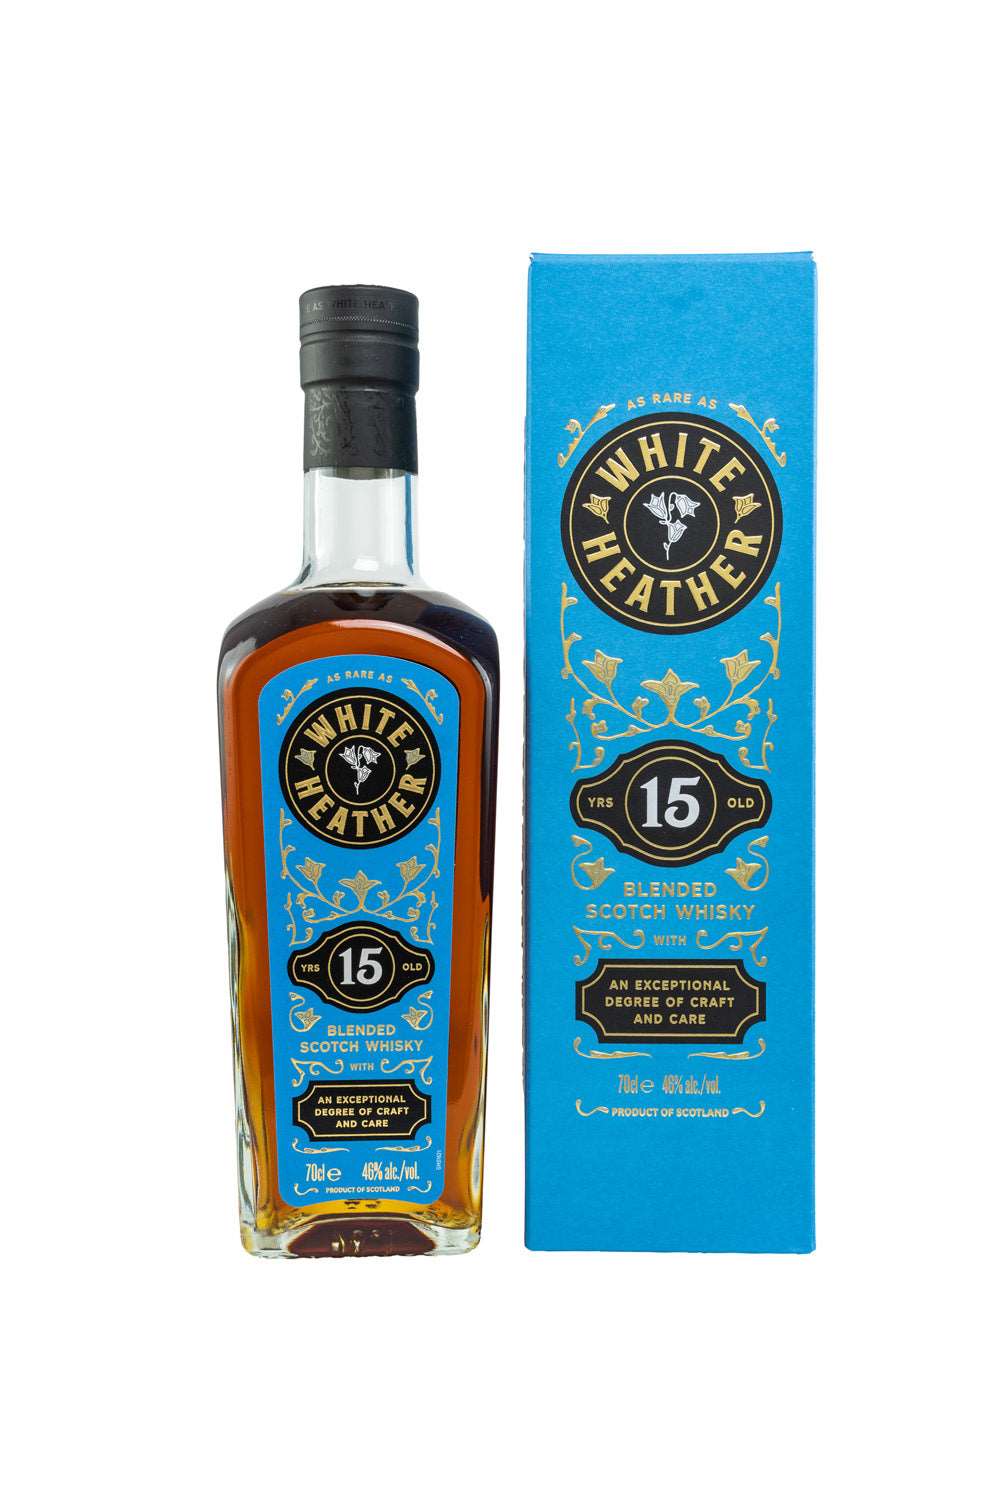 White Heather 15 y.o. Blended Scotch Whisky by Billy Walker 46% vol. 700ml - Maltimore